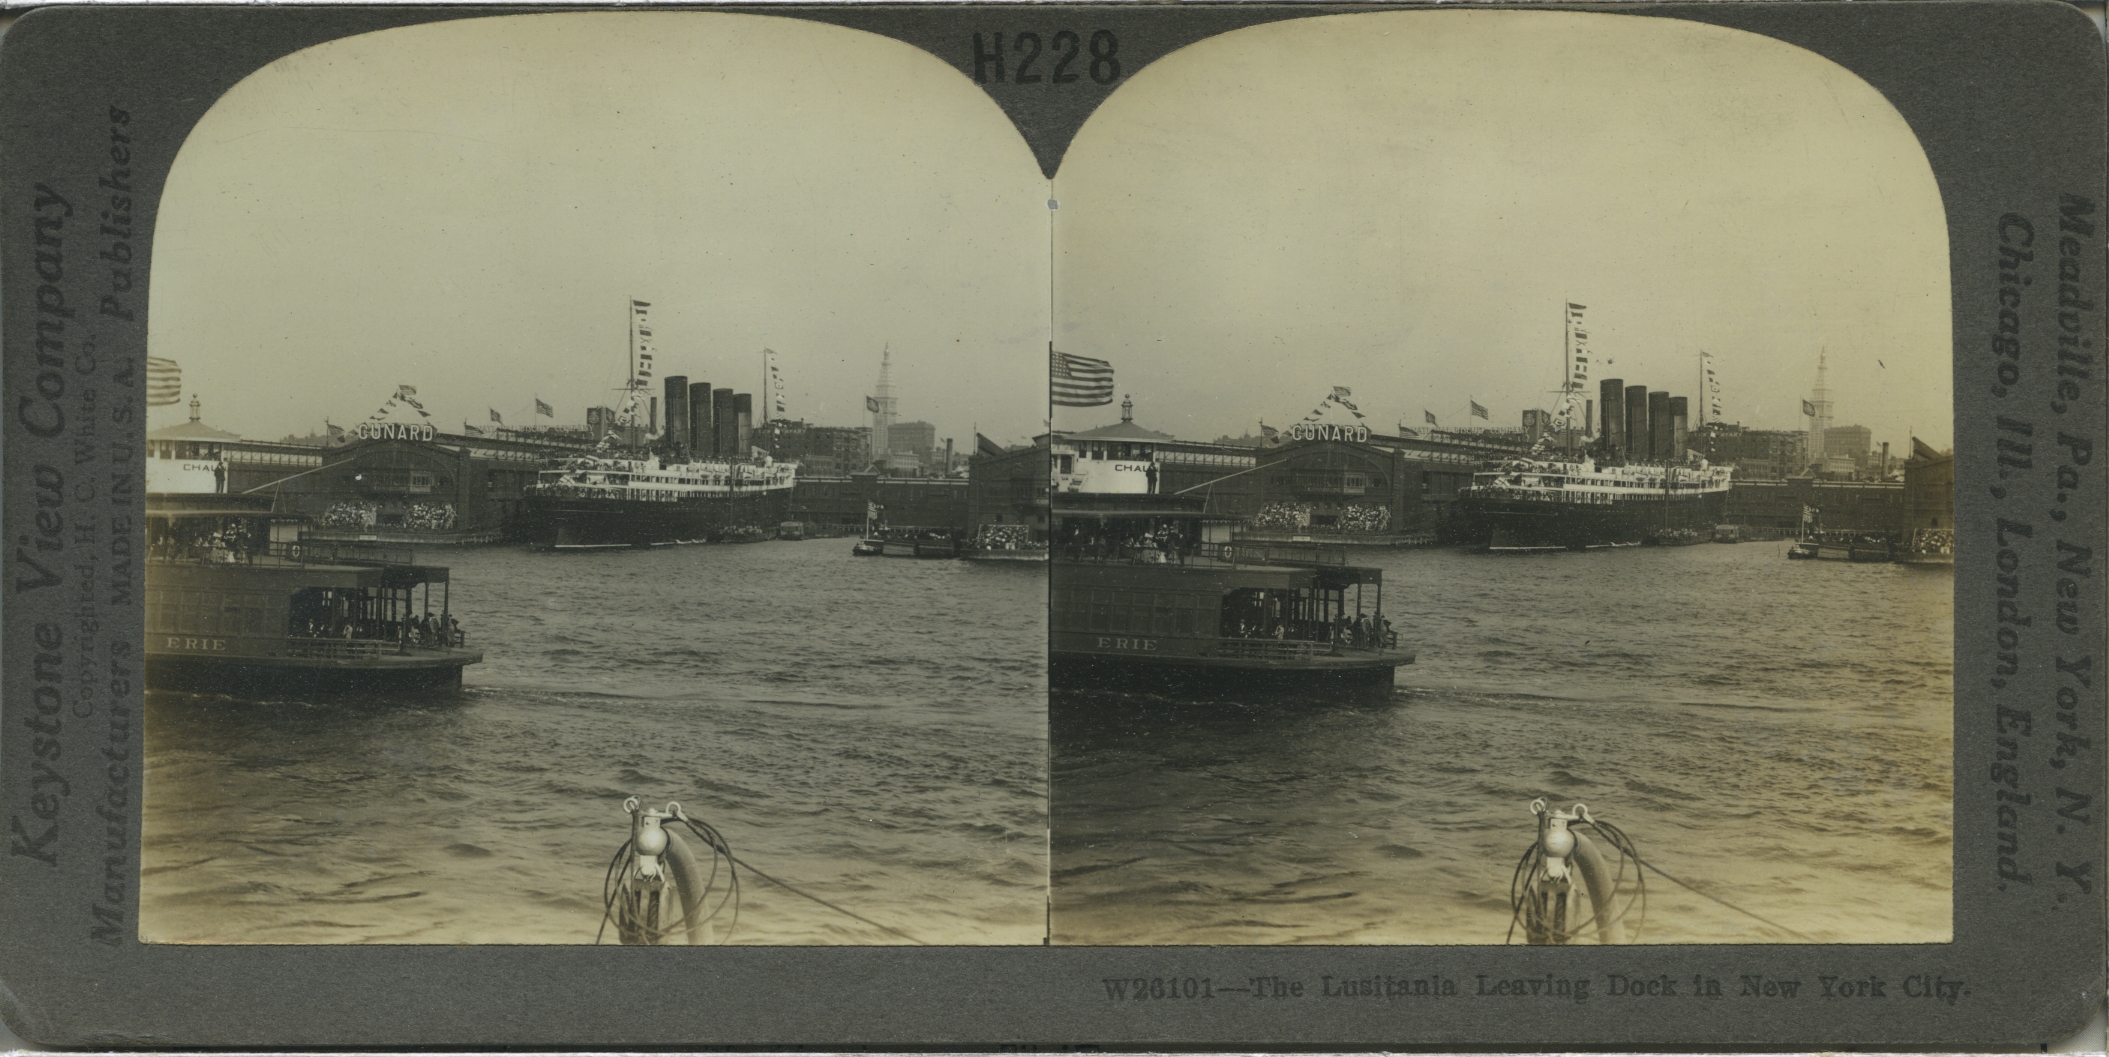 The Lusitania Leaving Dock in New York City